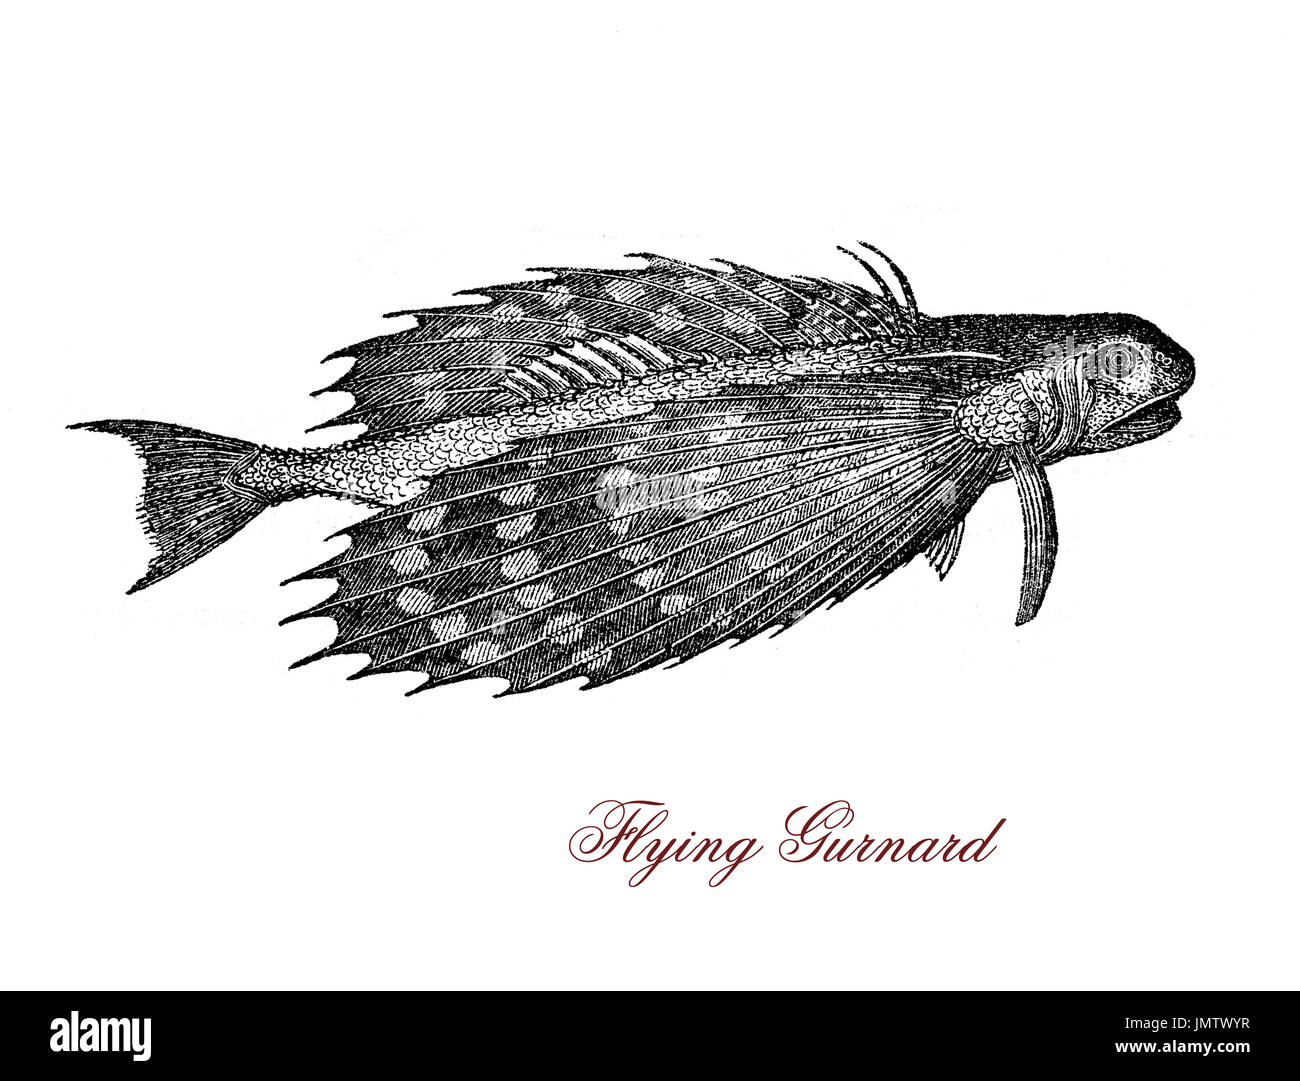 Vintage engraving of flying gurnard, tropical fish of Atlantic Ocean with semi-transparent bright blue phosphorescent 'wings' Stock Photo